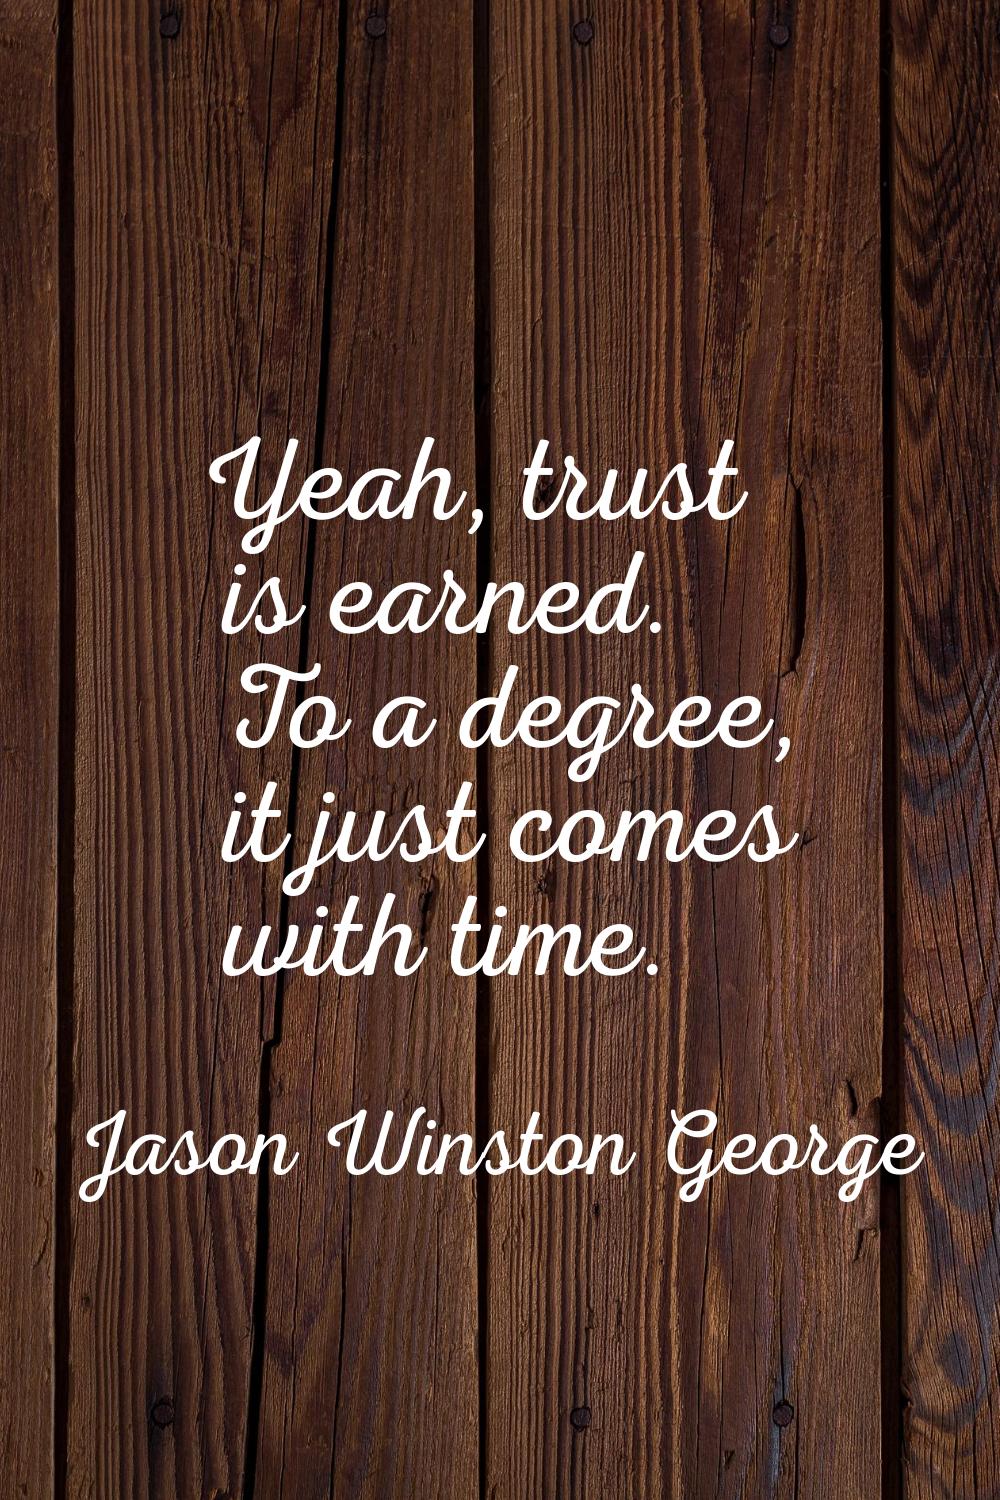 Yeah, trust is earned. To a degree, it just comes with time.